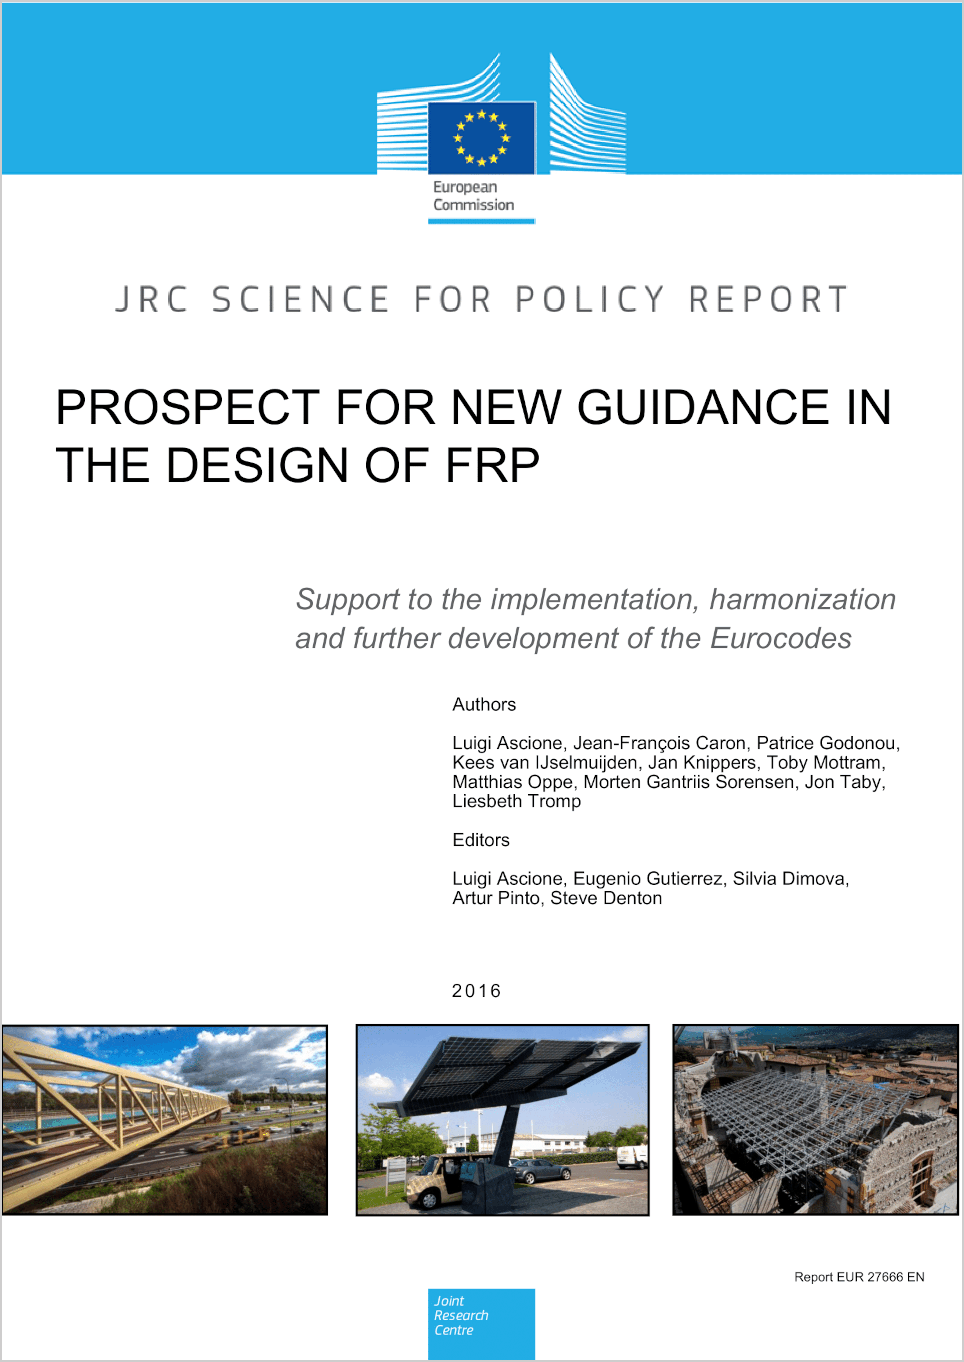 Prospect for new guidance in the design of FRP